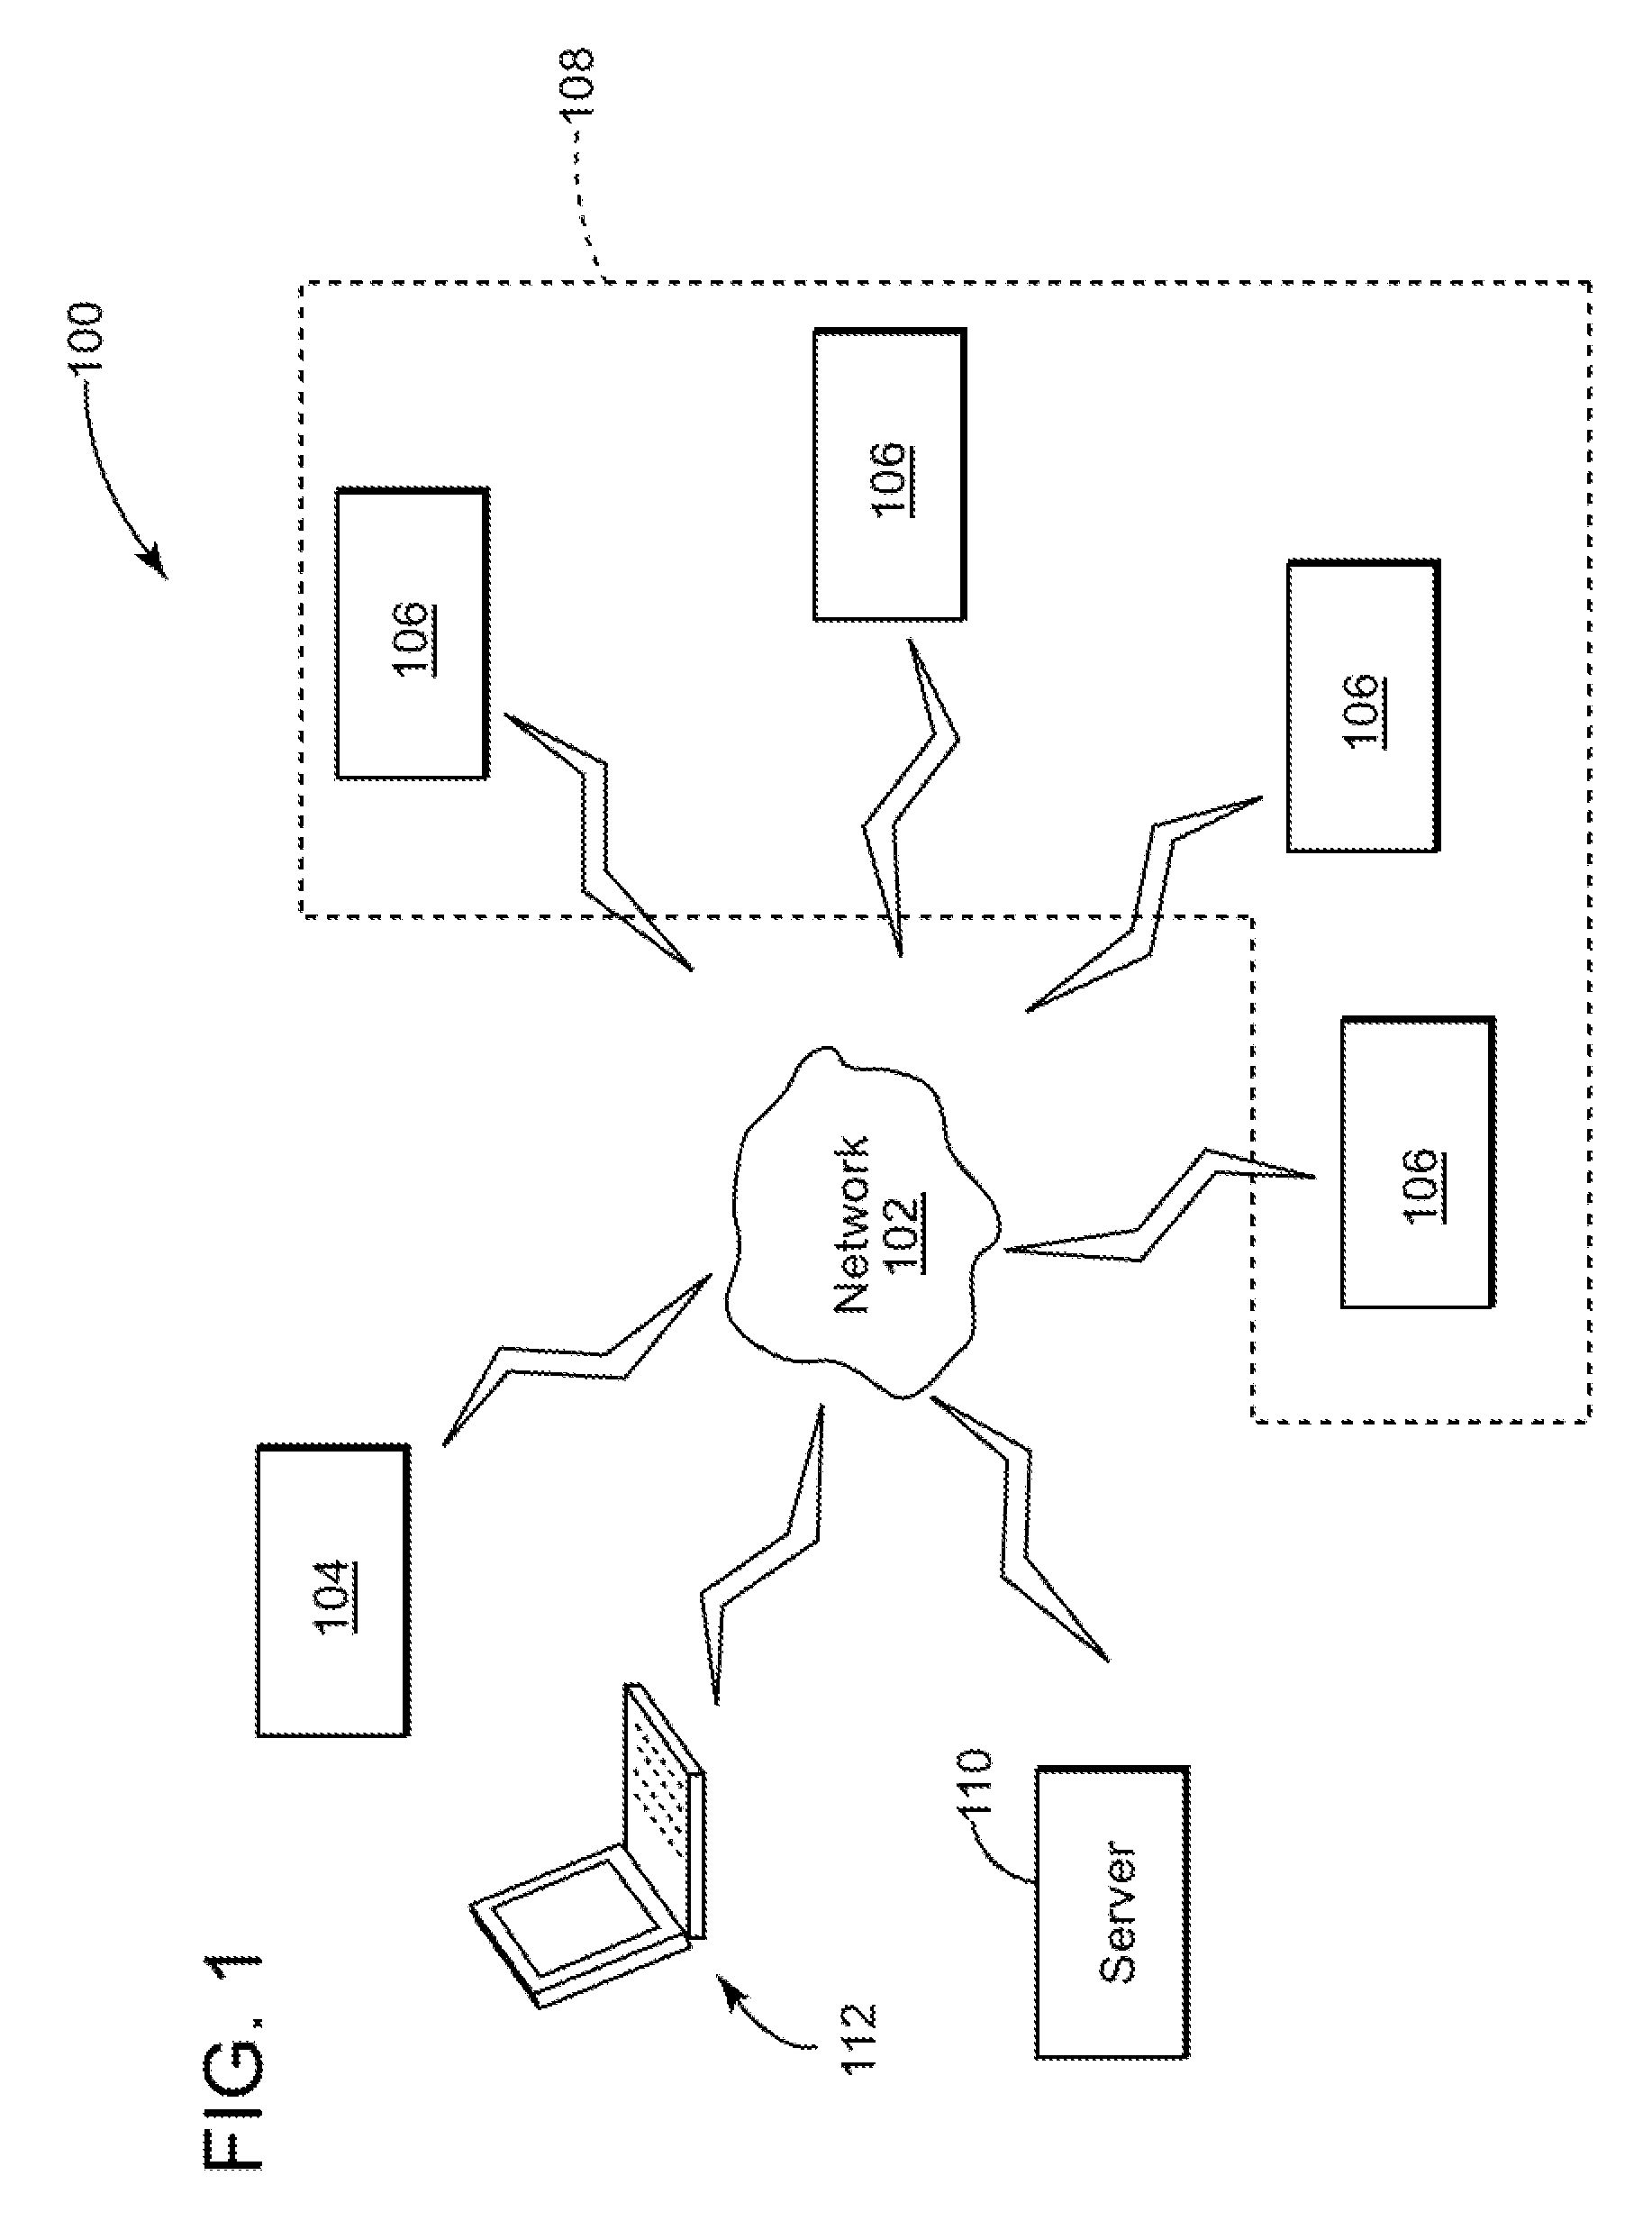 System and method for updating firmware across devices in a process facility